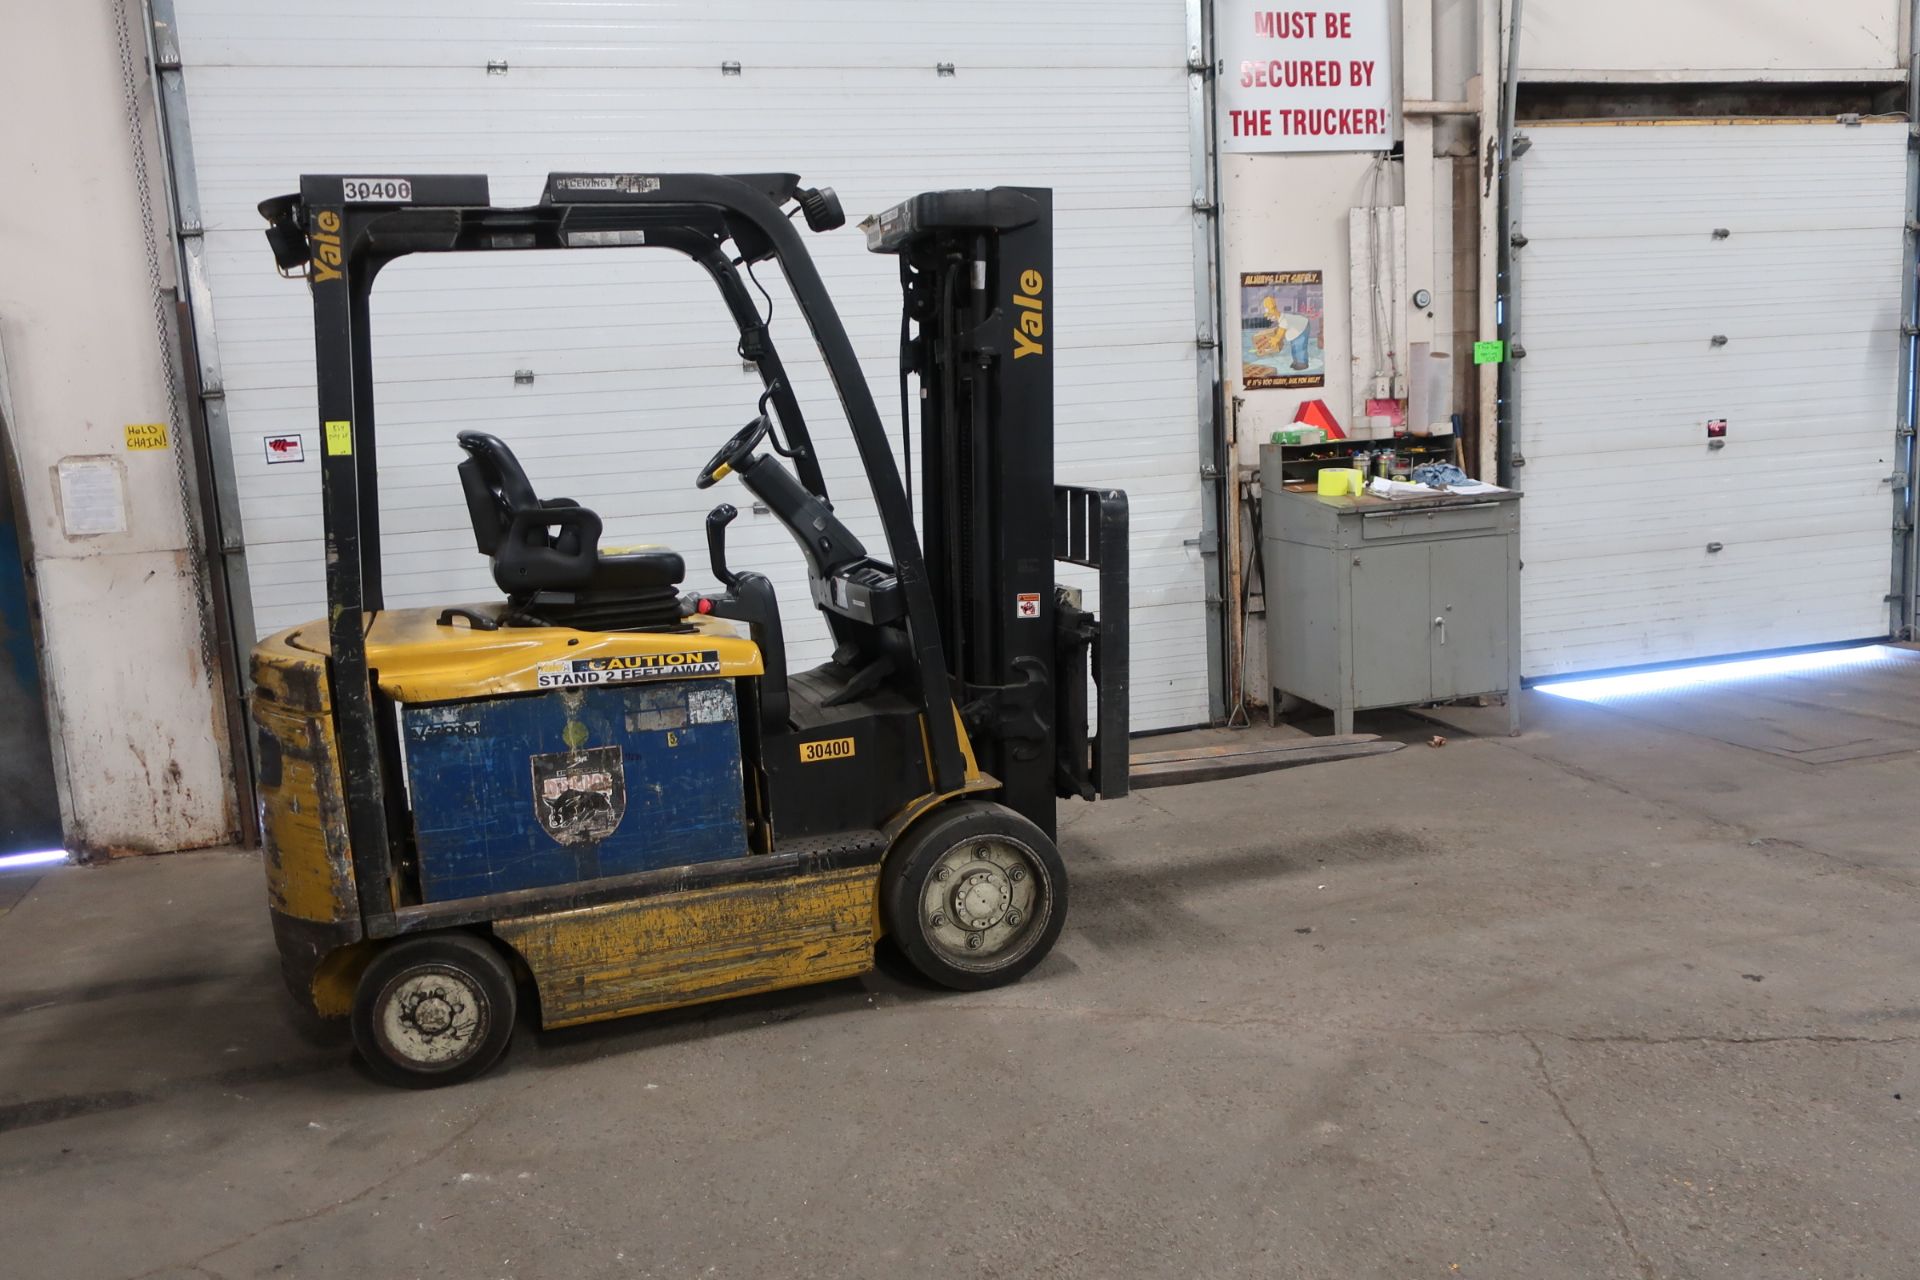 FREE CUSTOMS - 2014 Yale 5000lbs Capacity Forklift with 3-stage mast - electric with charger with